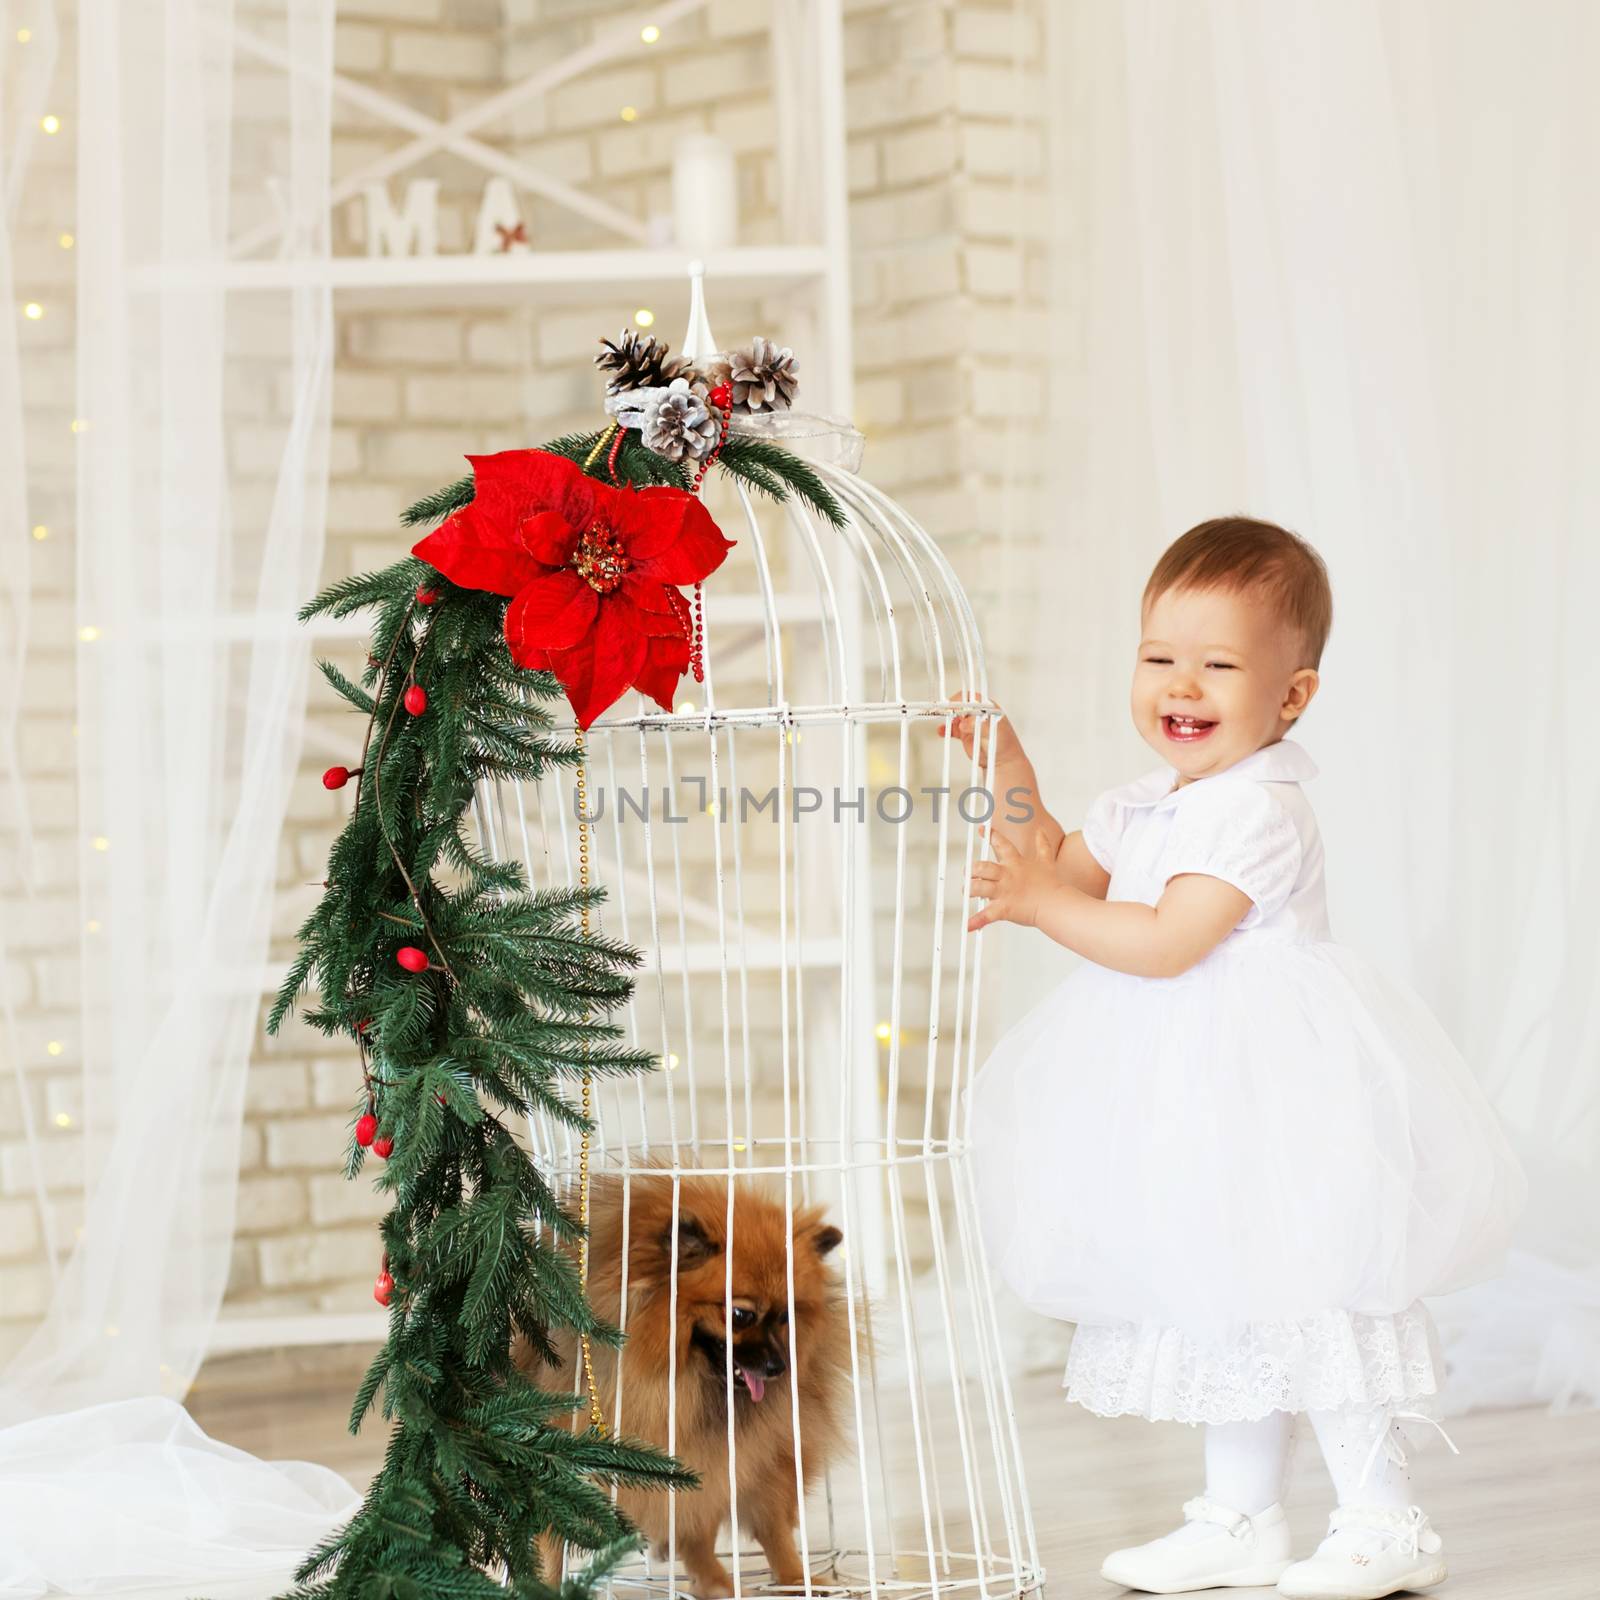 Portrait of a beautiful baby girl playing with a puppy in the interior with Christmas decorations.